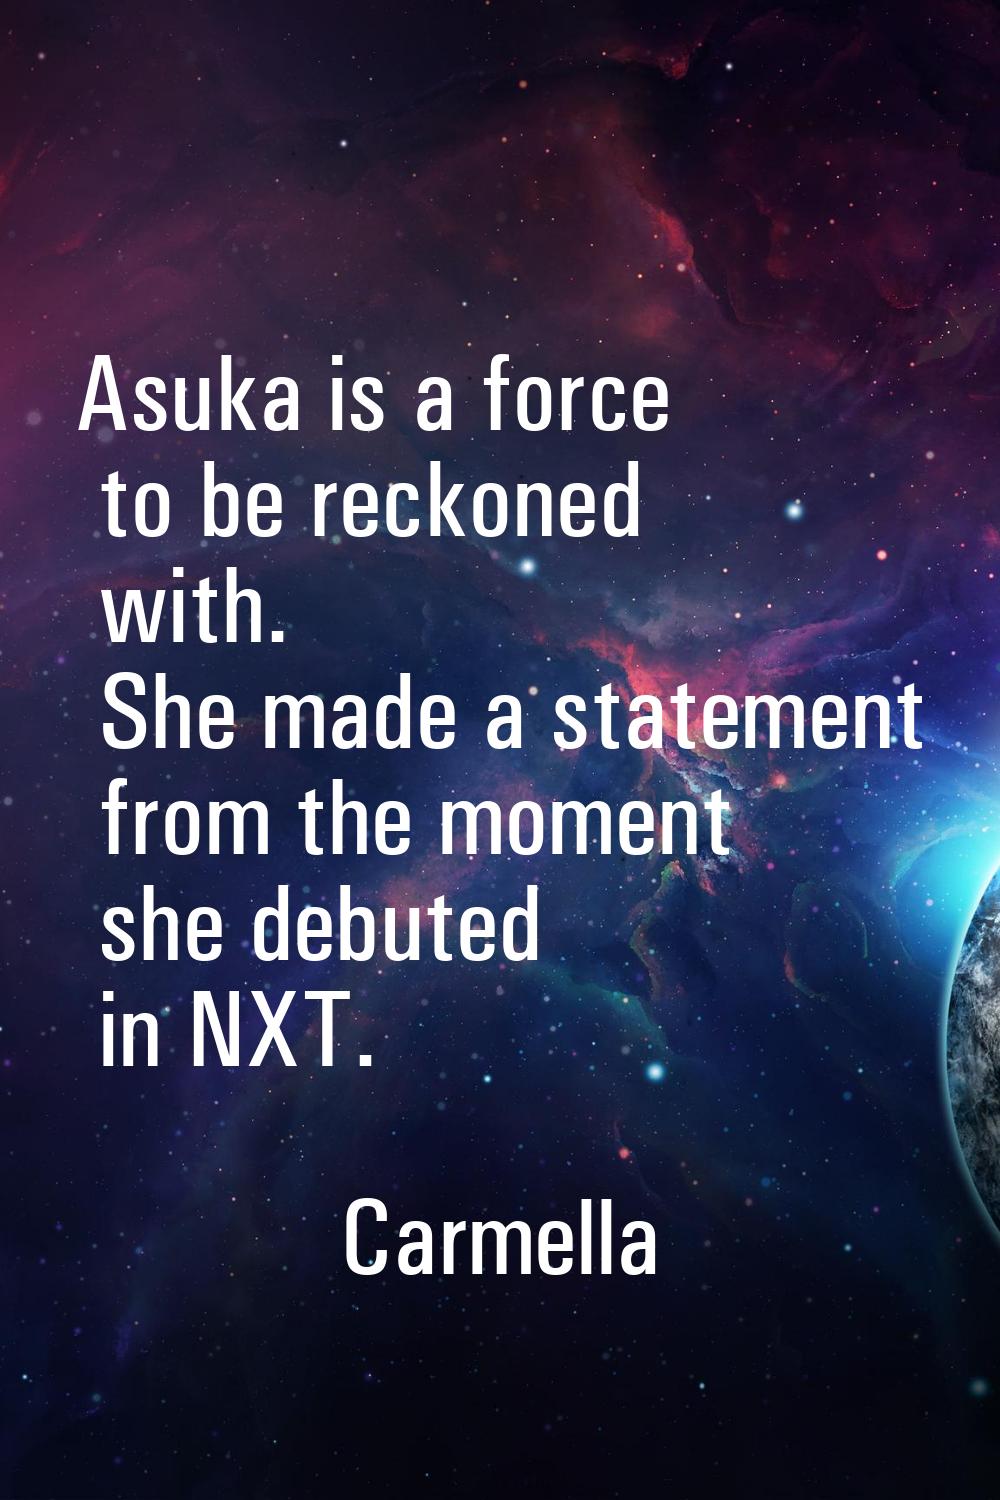 Asuka is a force to be reckoned with. She made a statement from the moment she debuted in NXT.